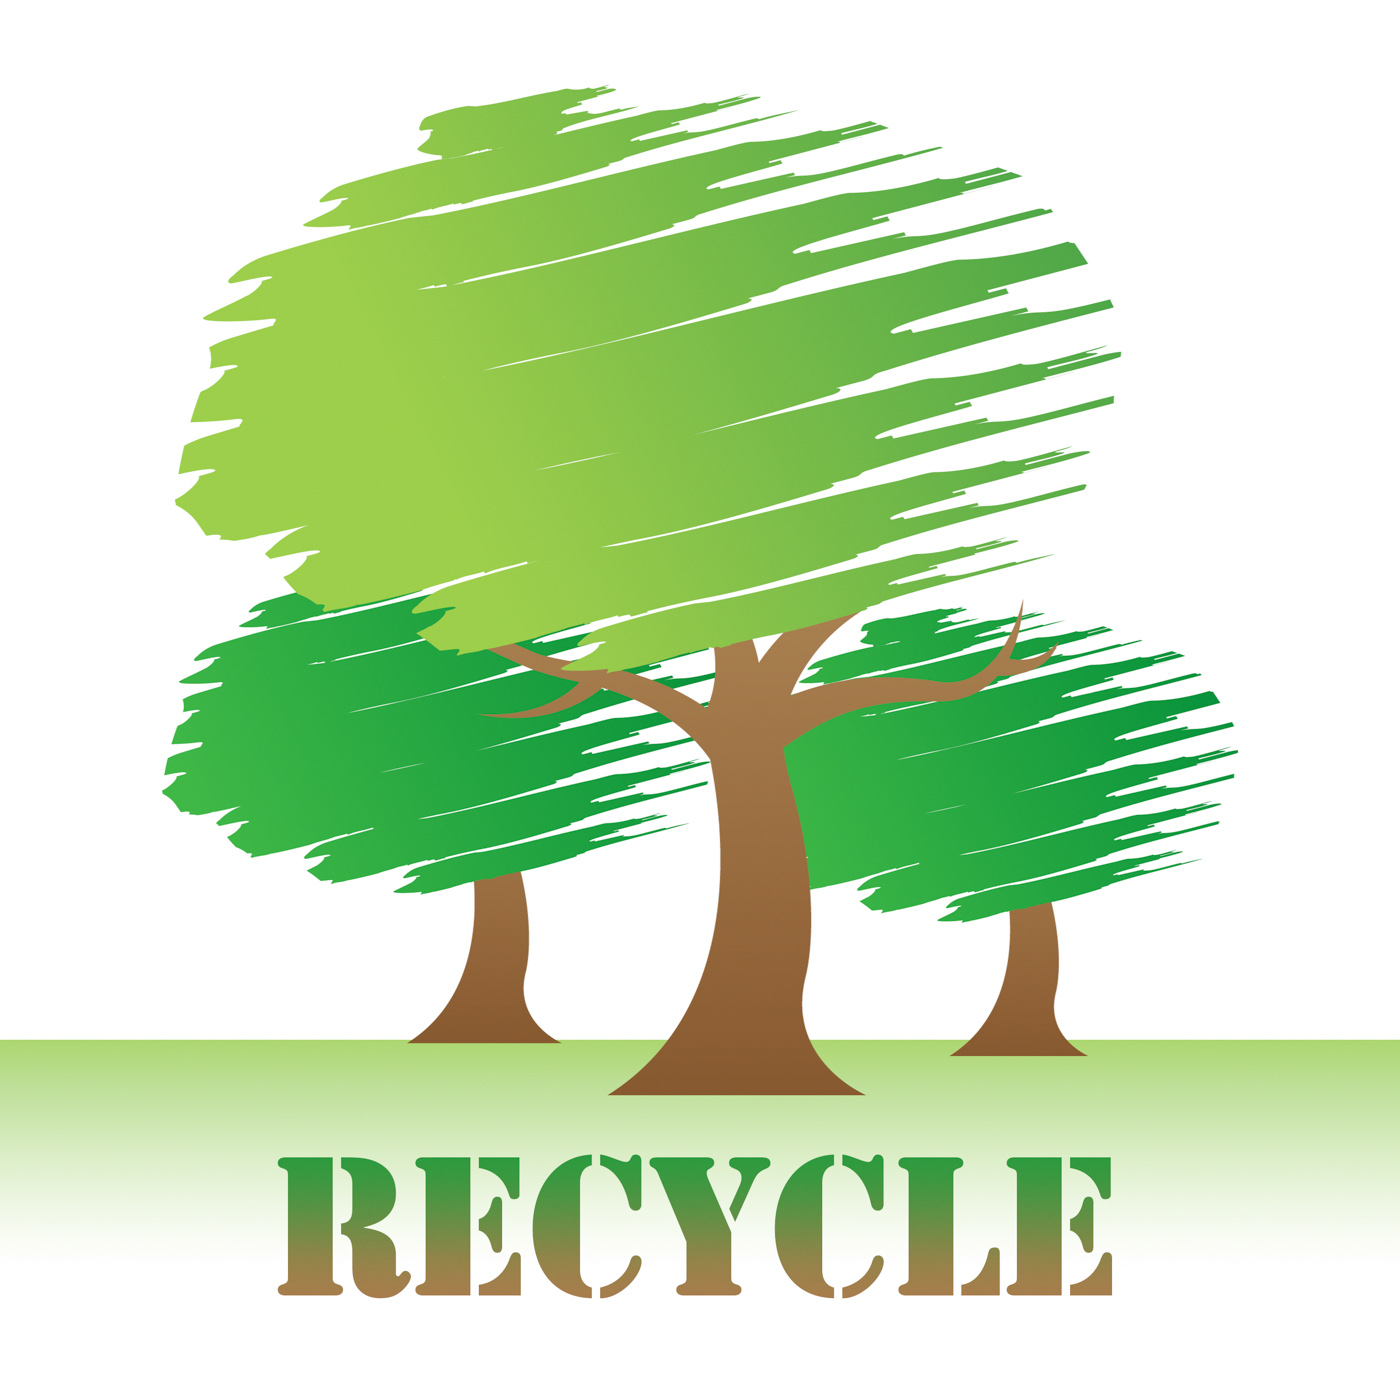 Recycle trees shows earth friendly and reuse photo